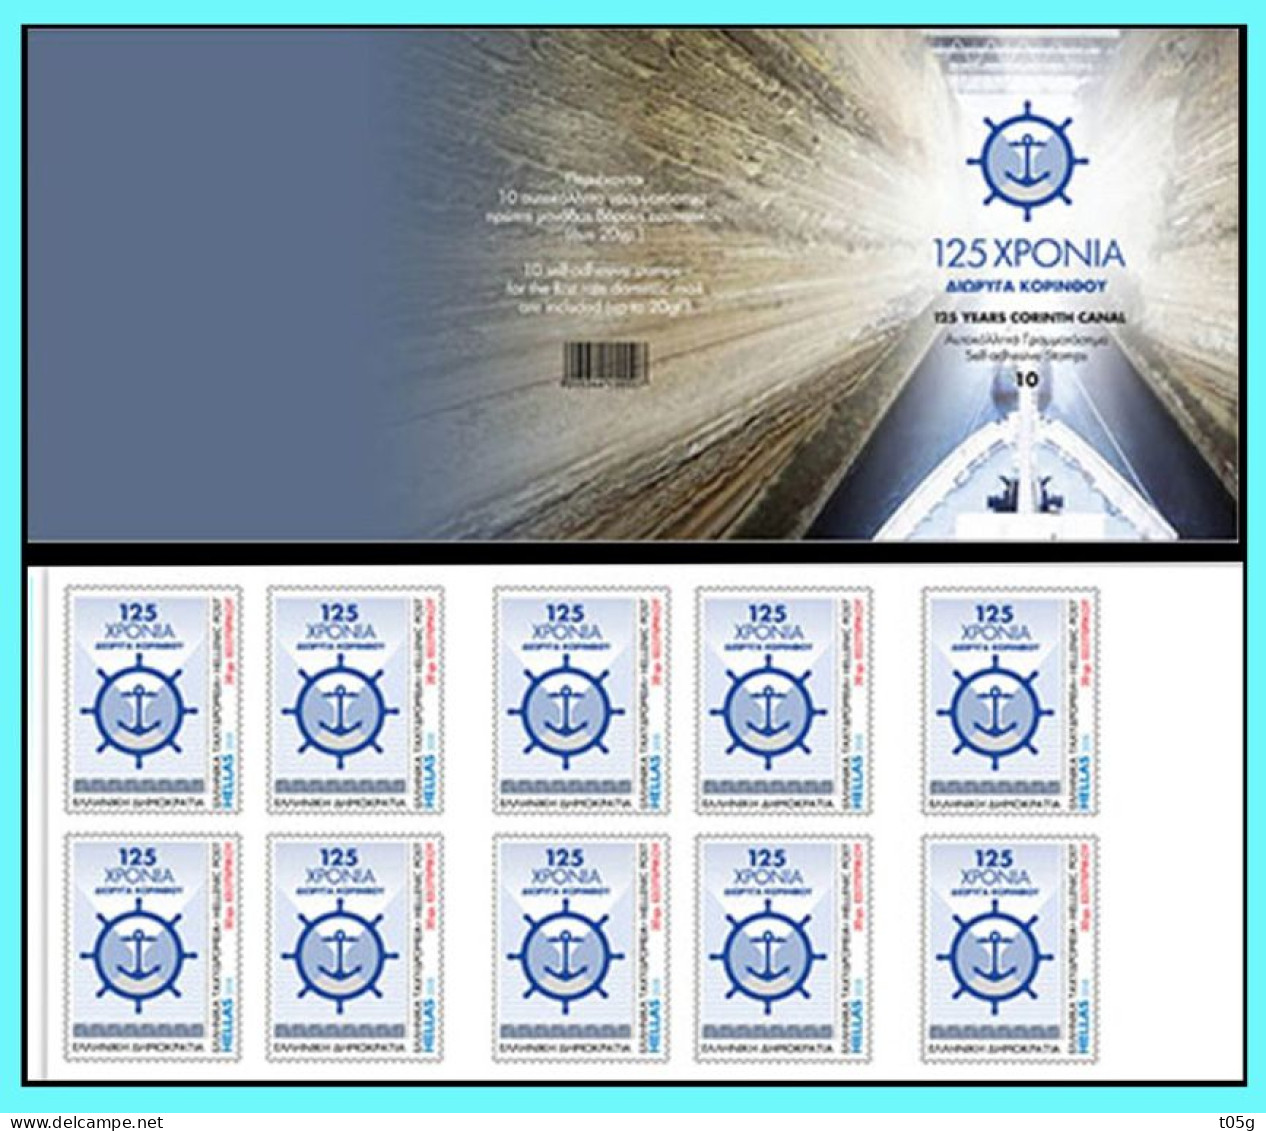 GREECE- GRECE  - HELLAS 2018: 125 YEARS OF THE KORINTH CANAL​ Self-athesive Stamp Compl. Booklet  MNH** - Ungebraucht